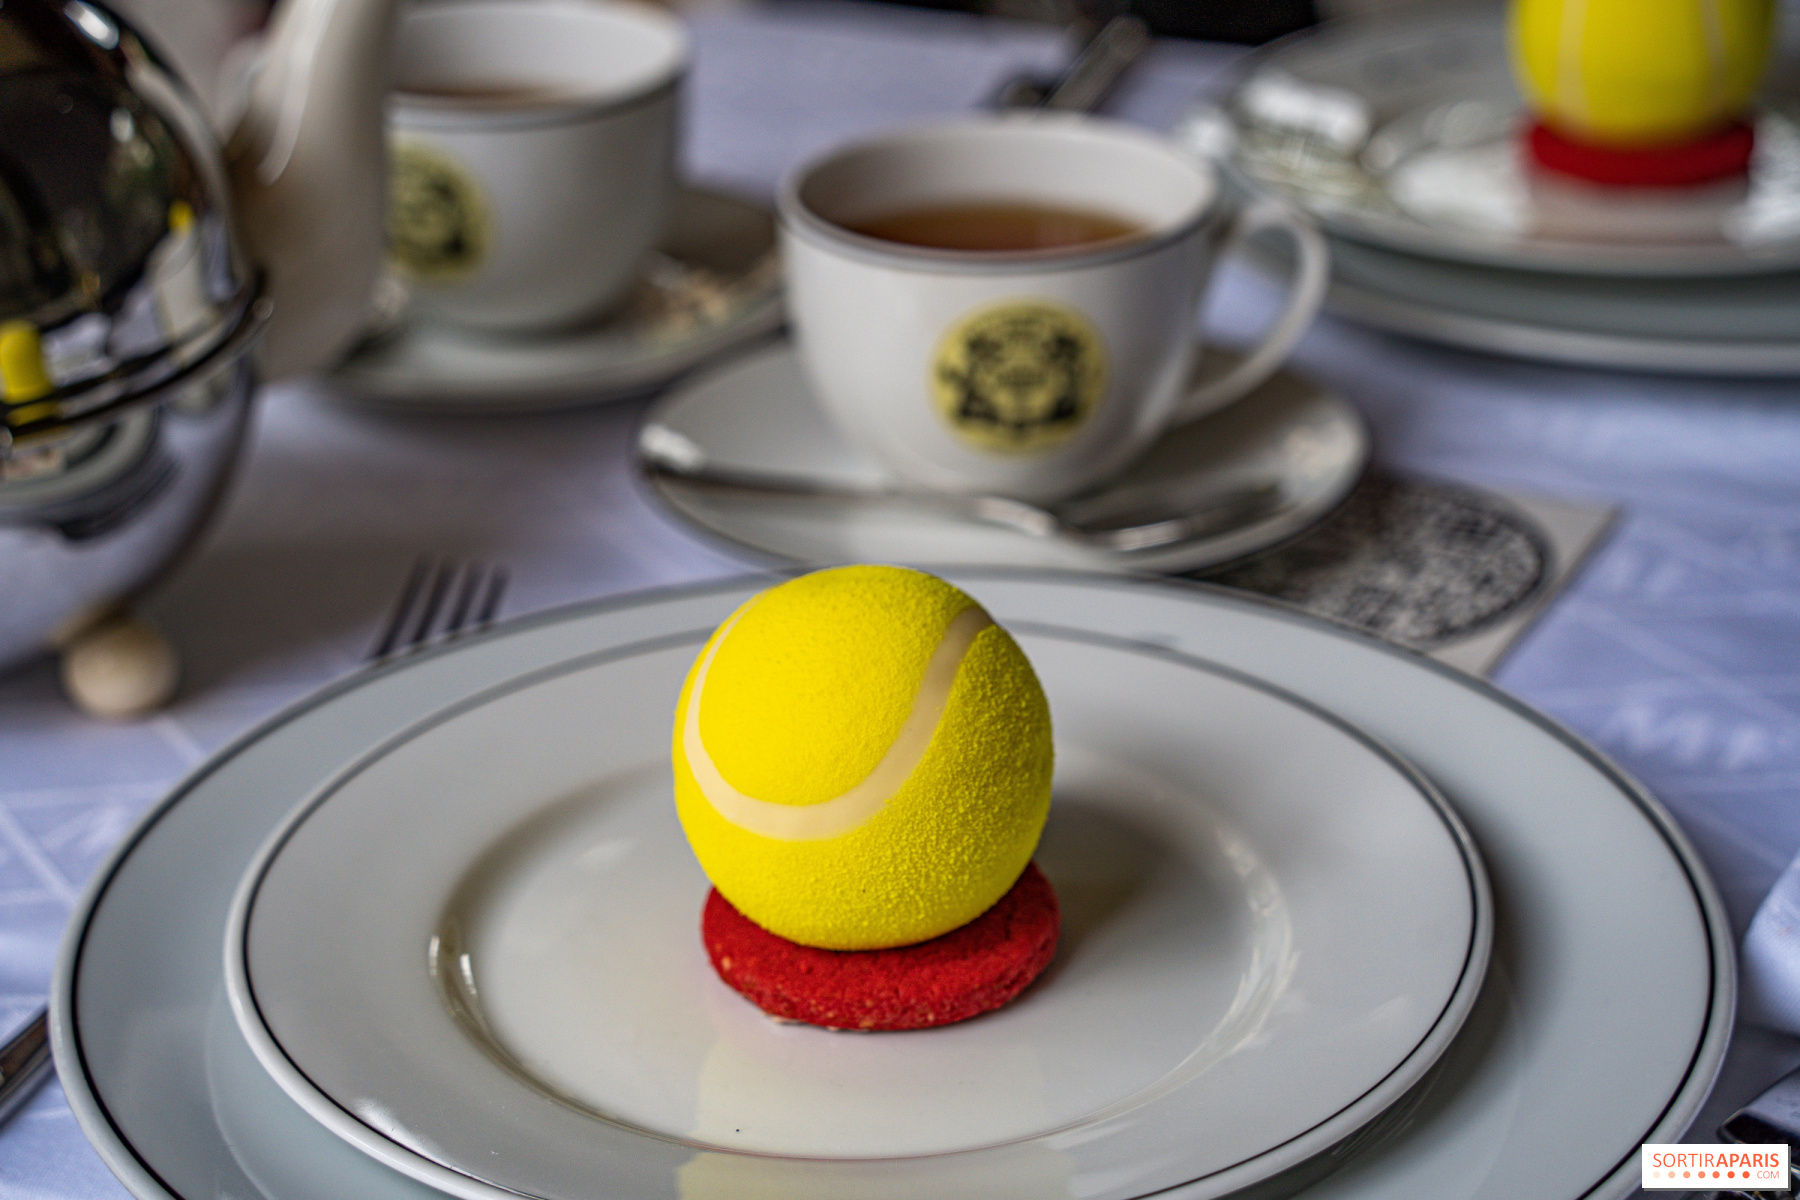 Mariage Frères launches their first Christmas teatime in Paris